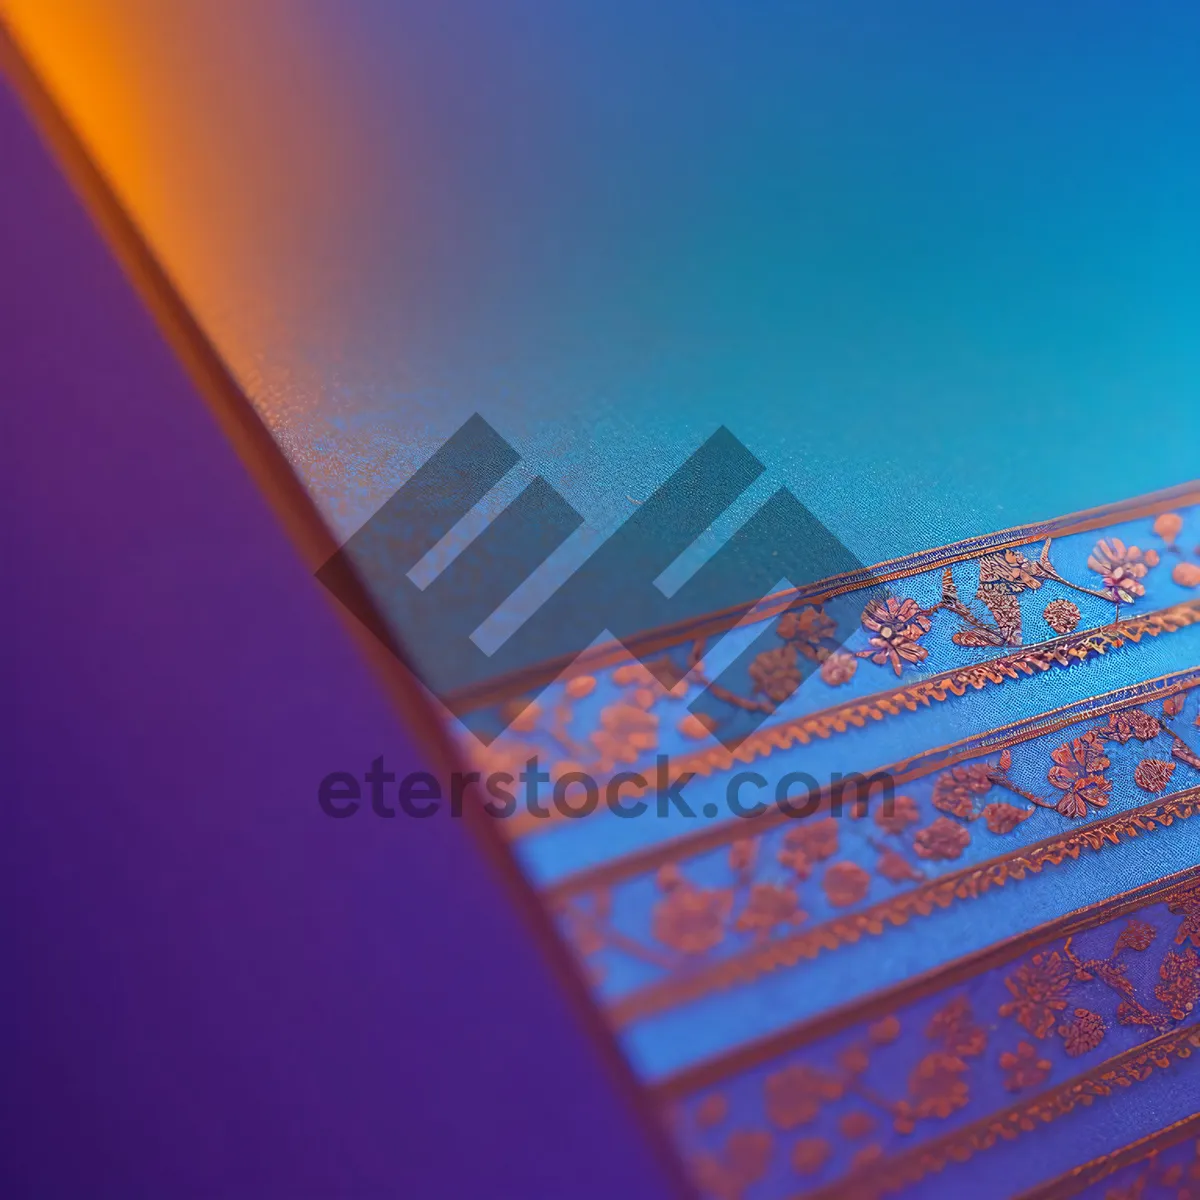 Picture of Artistic Graphic Design Pattern on Envelope Card